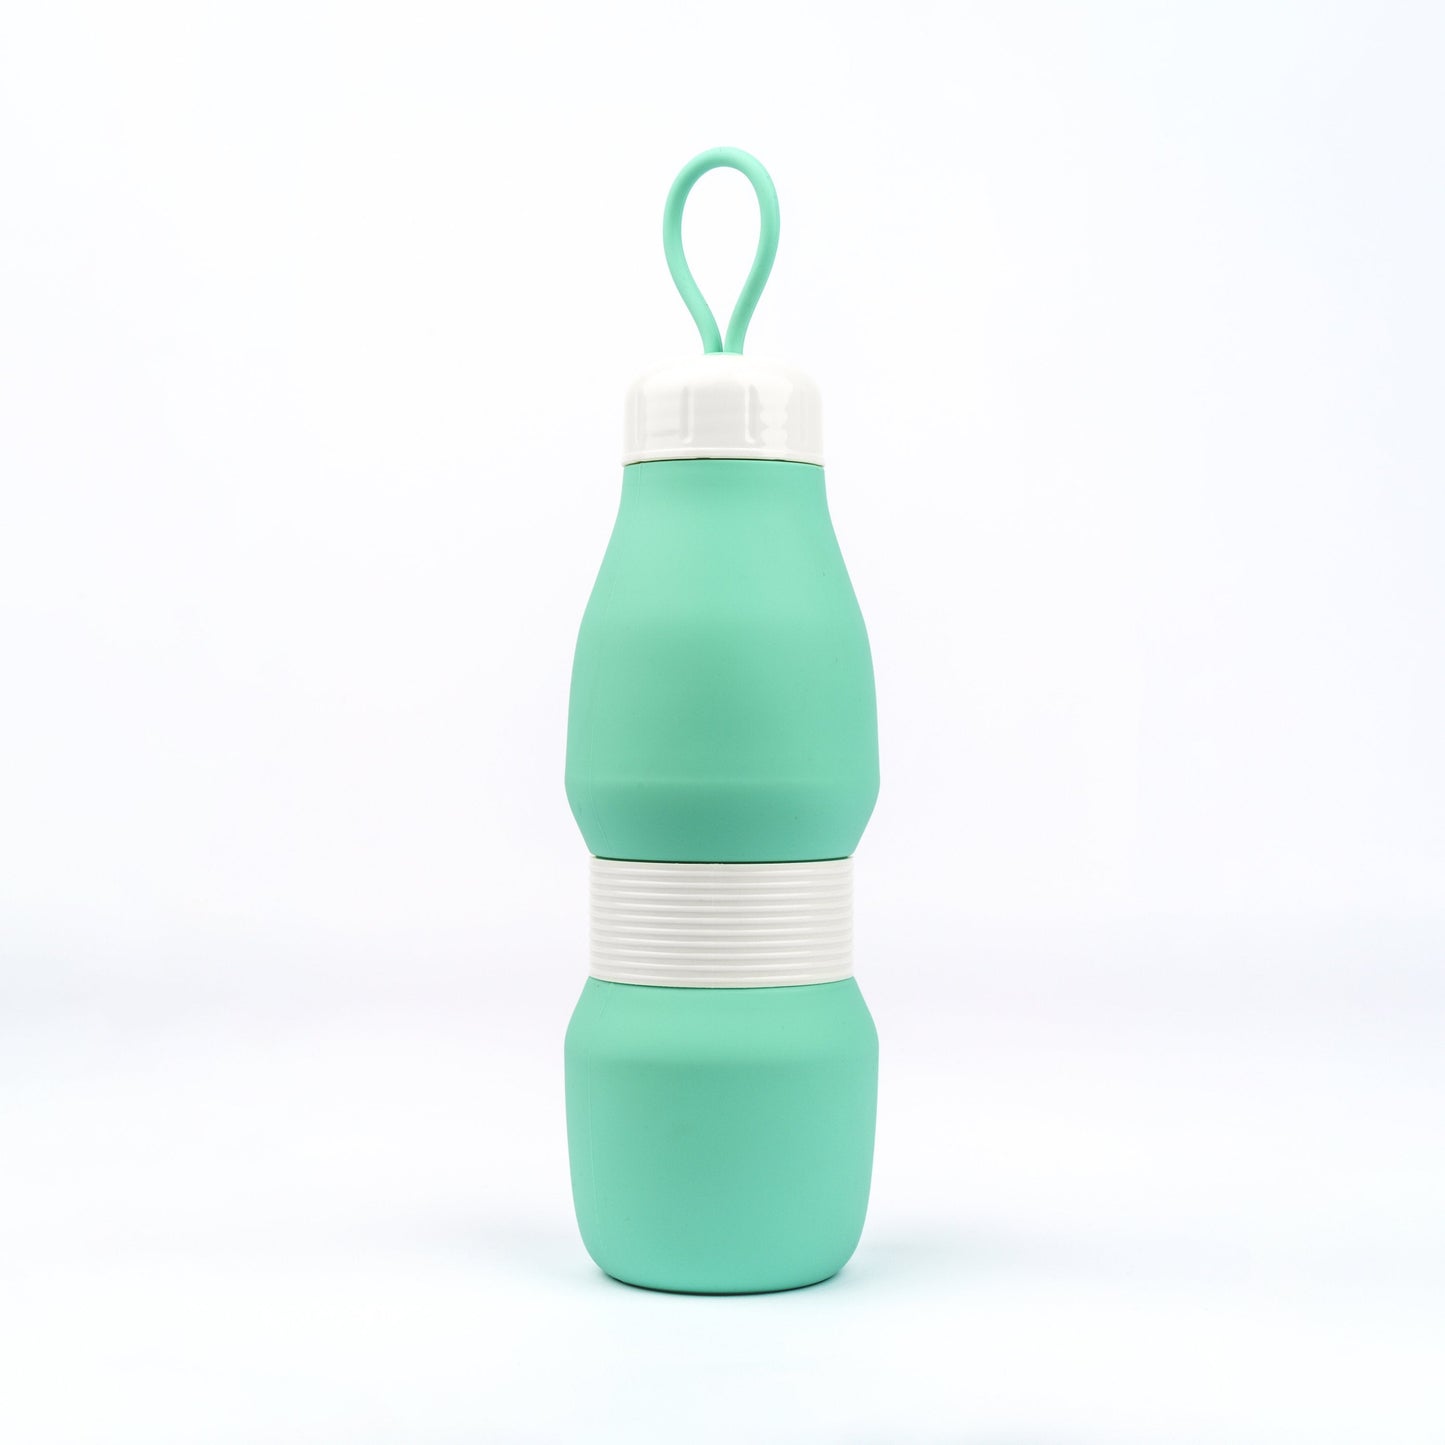 Whippy Collapsible Silicone Bottle 520ml - Sour Grape Teal